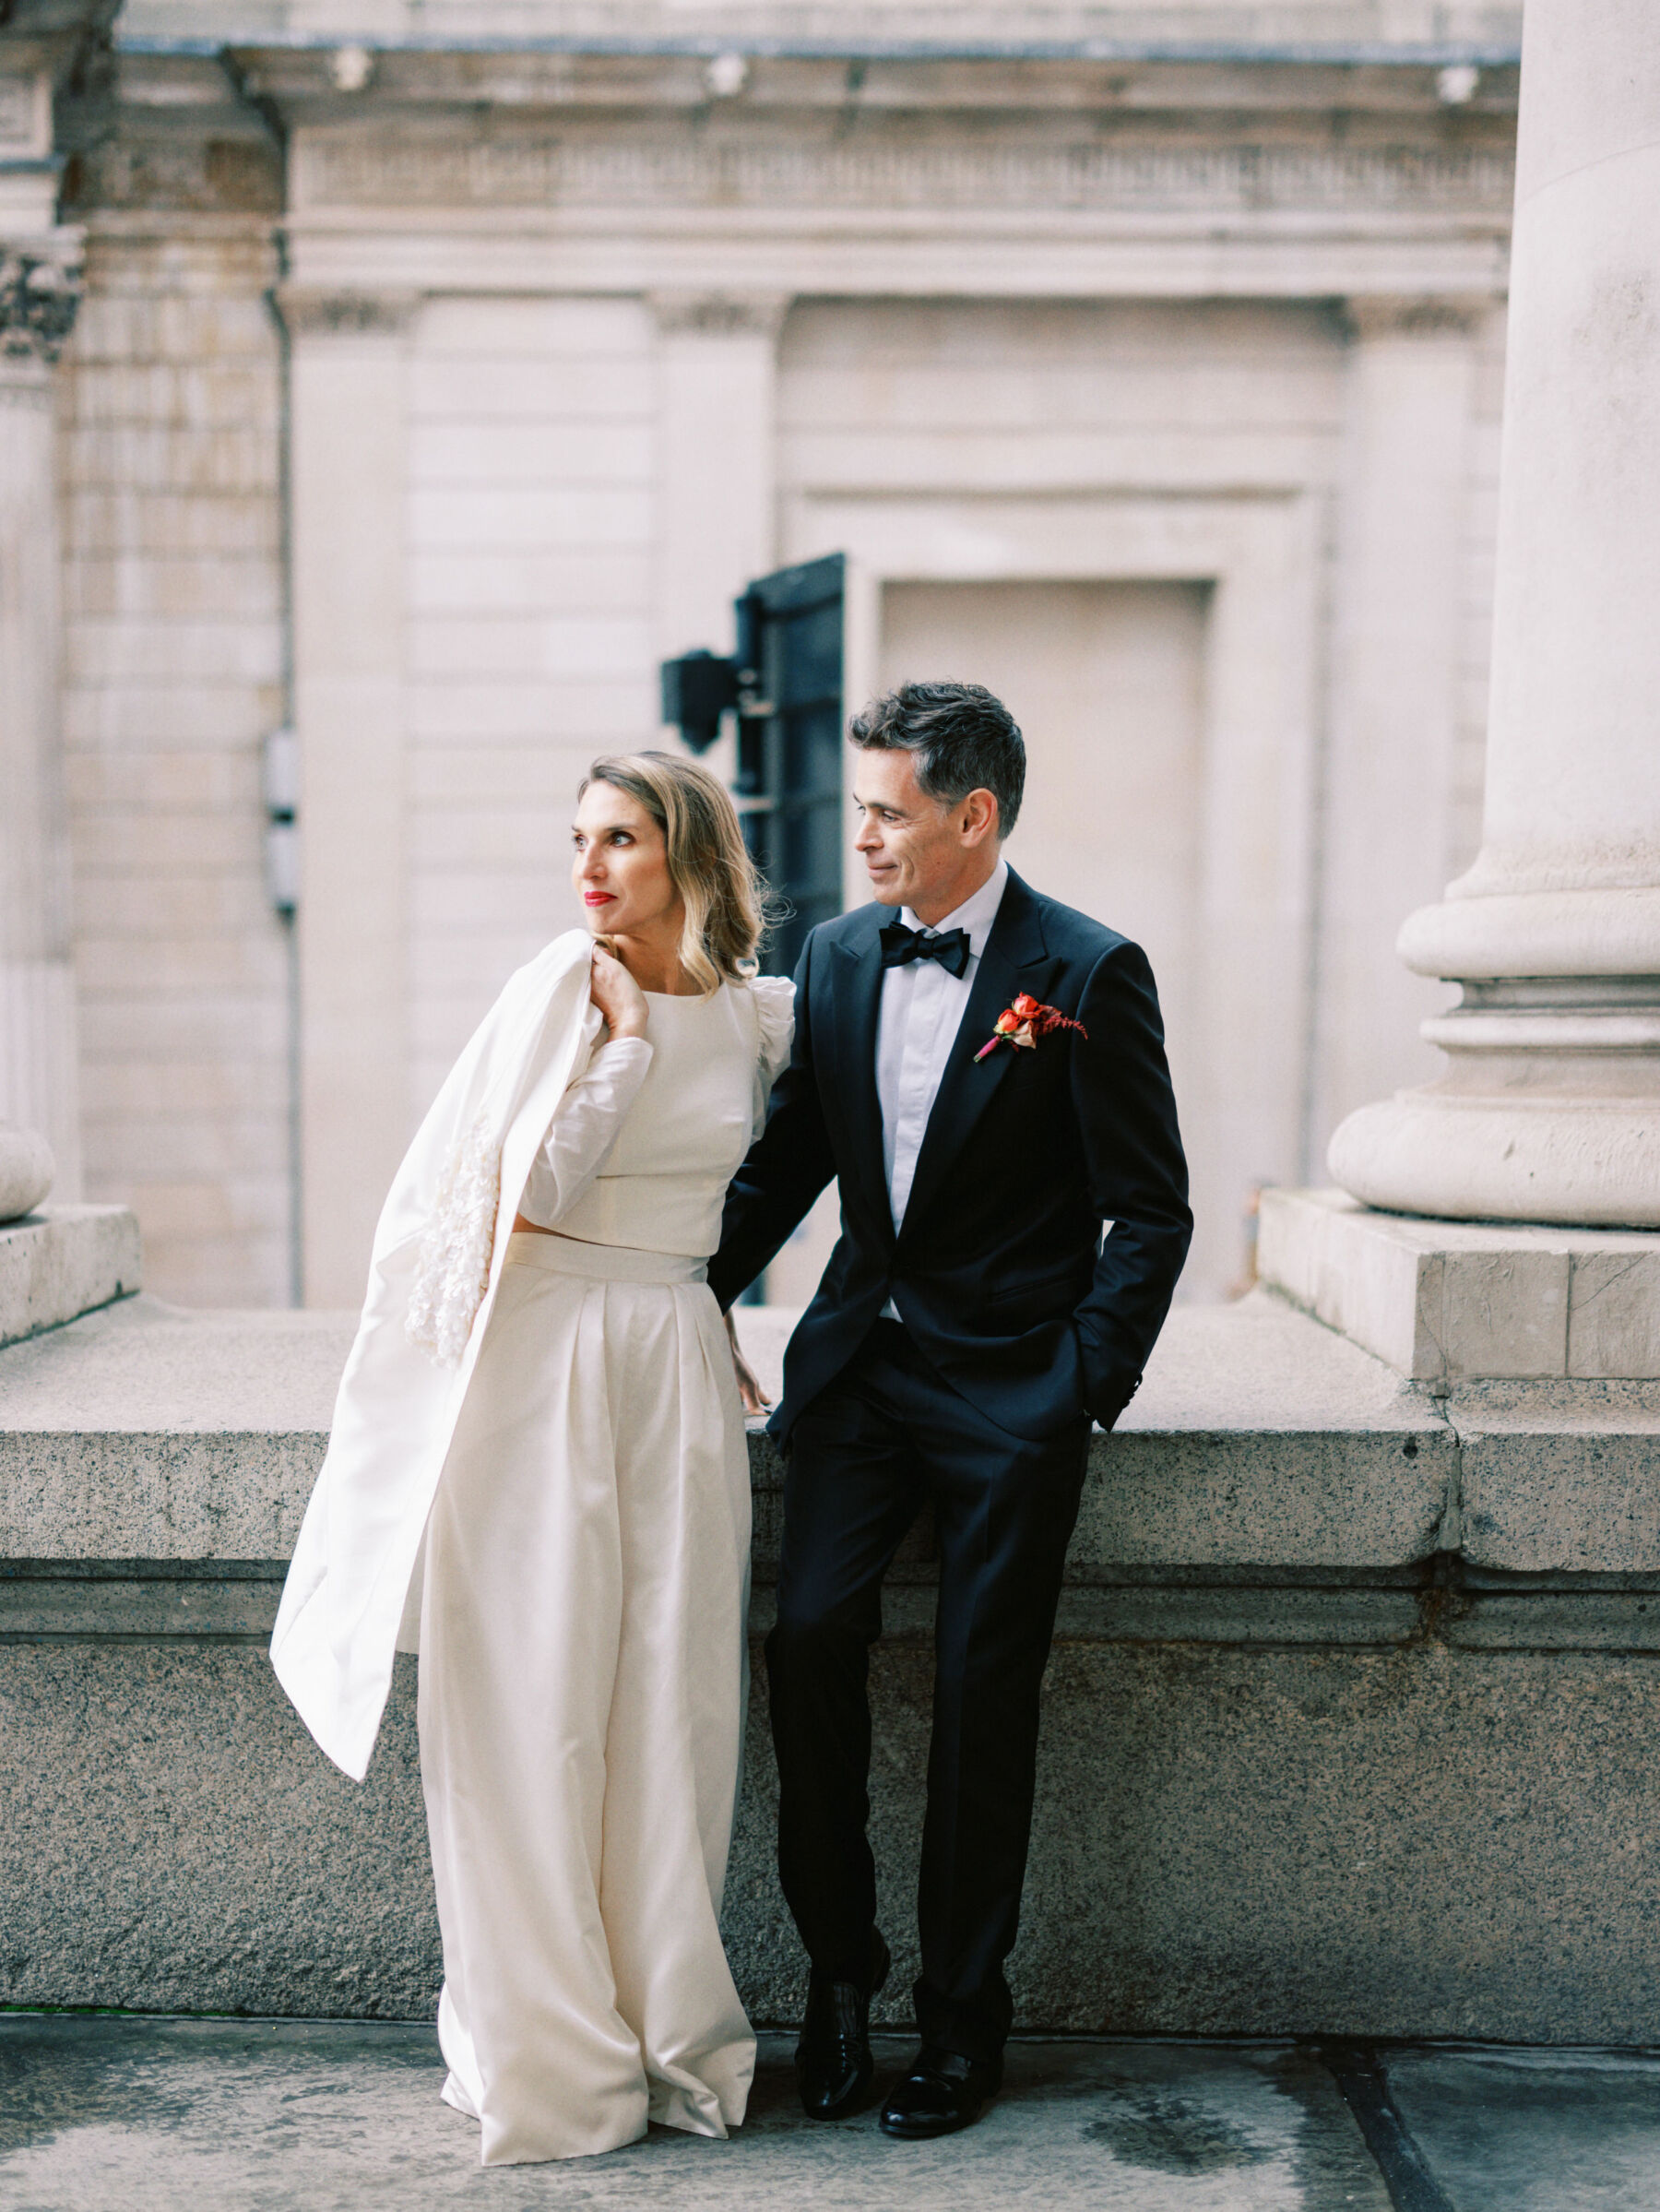 Peter Lindbergh and Dior inspired photograph of bride and groom in London. Bride wears modern wide leg bridal trousers by Halfpenny London. Kernwell Photography.